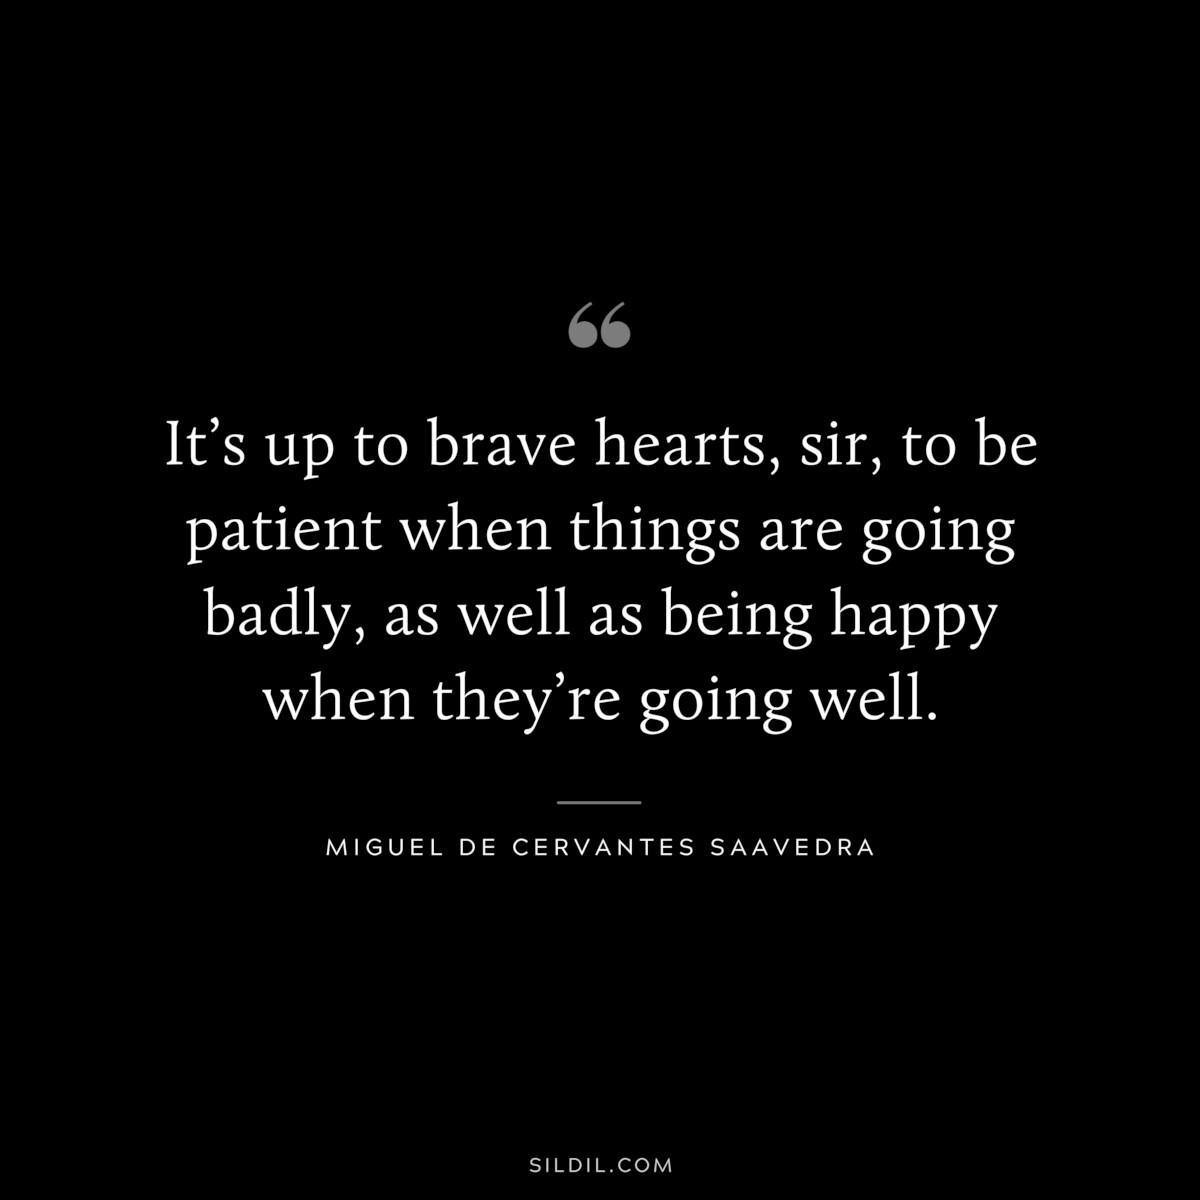 It’s up to brave hearts, sir, to be patient when things are going badly, as well as being happy when they’re going well. ― Miguel de Cervantes Saavedra